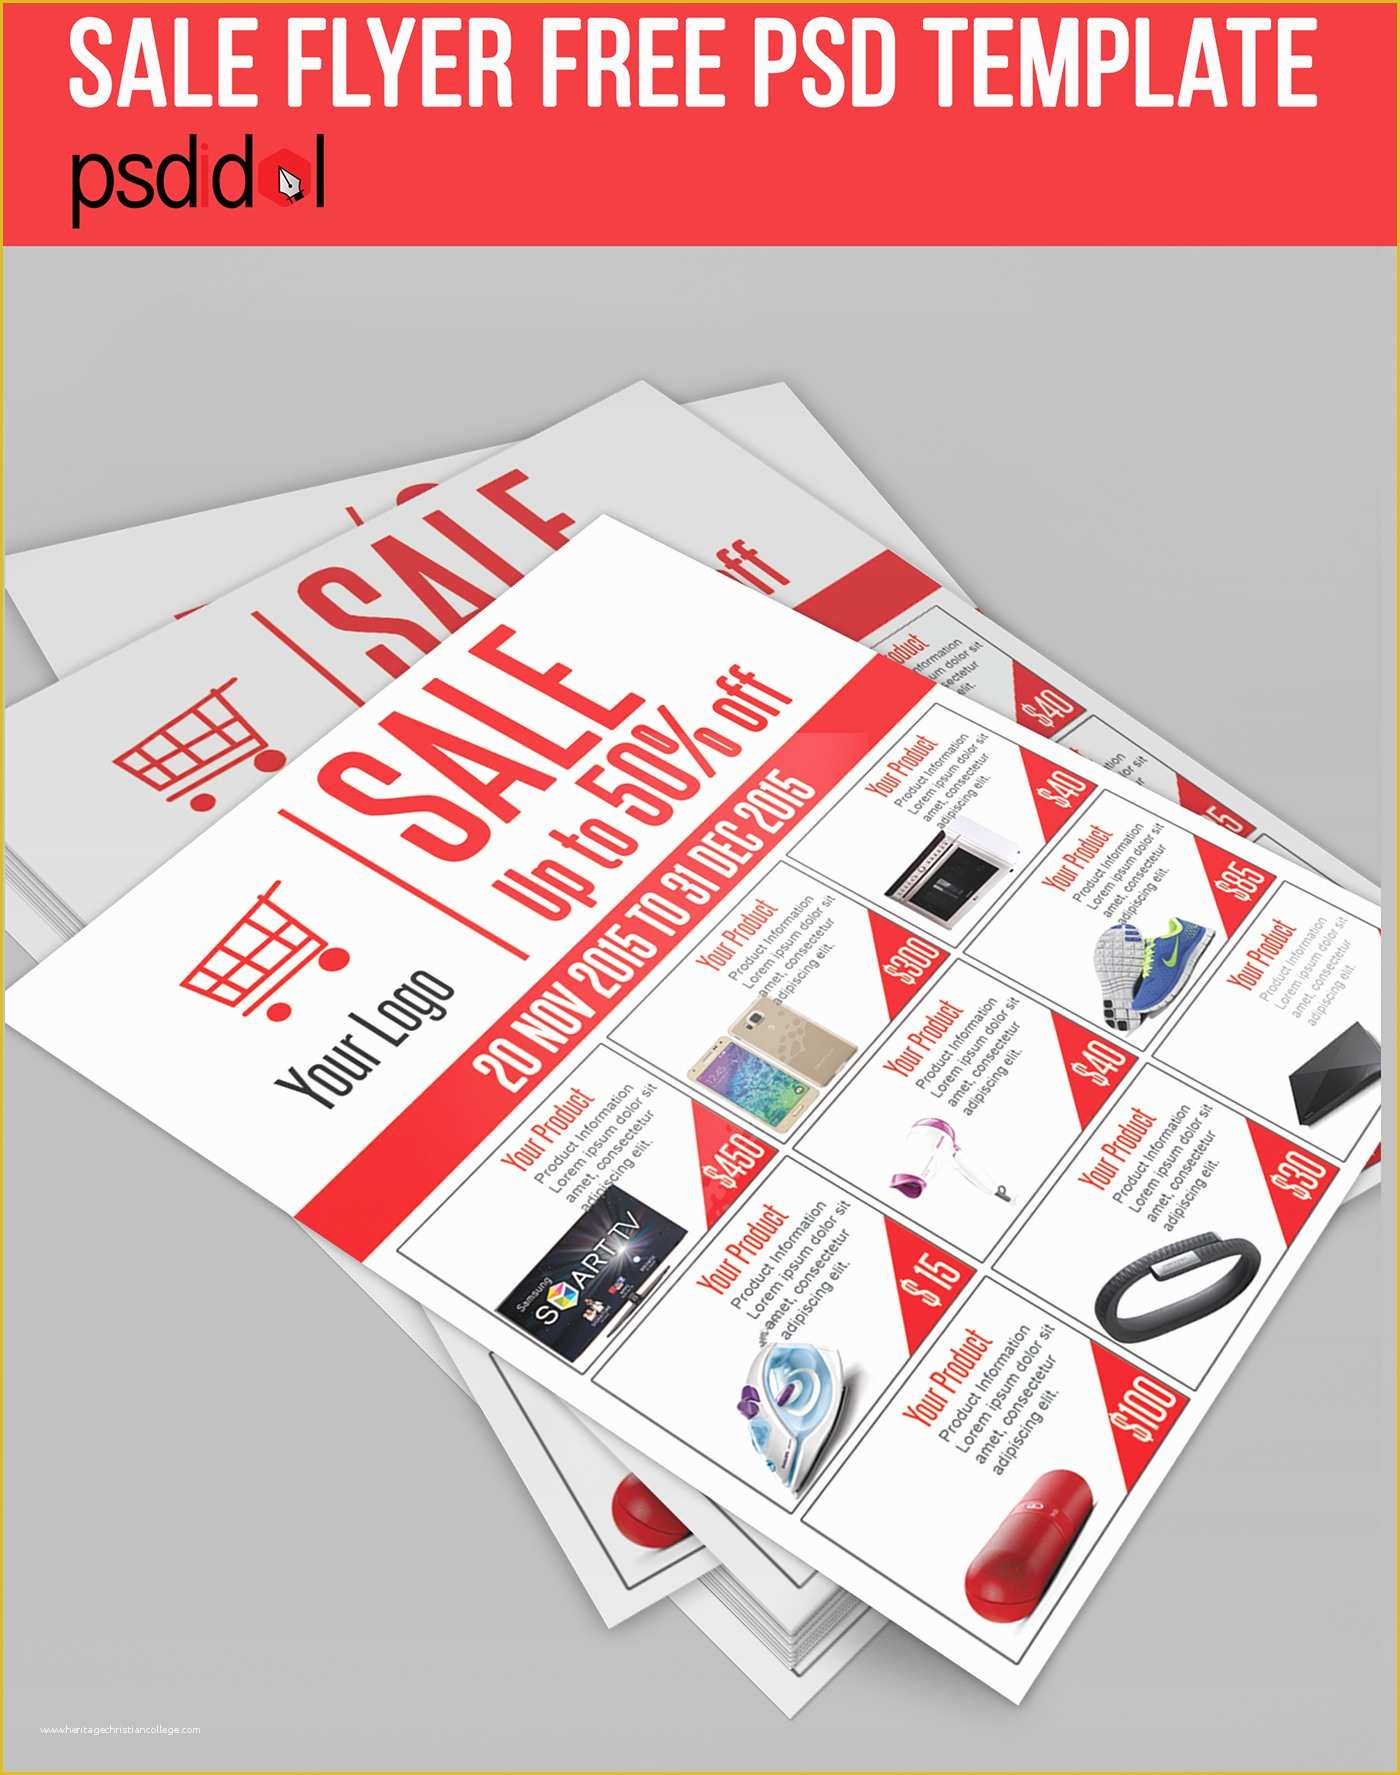 Poster Template Free Download Of Sale Flyer Free Psd Template Download On Behance